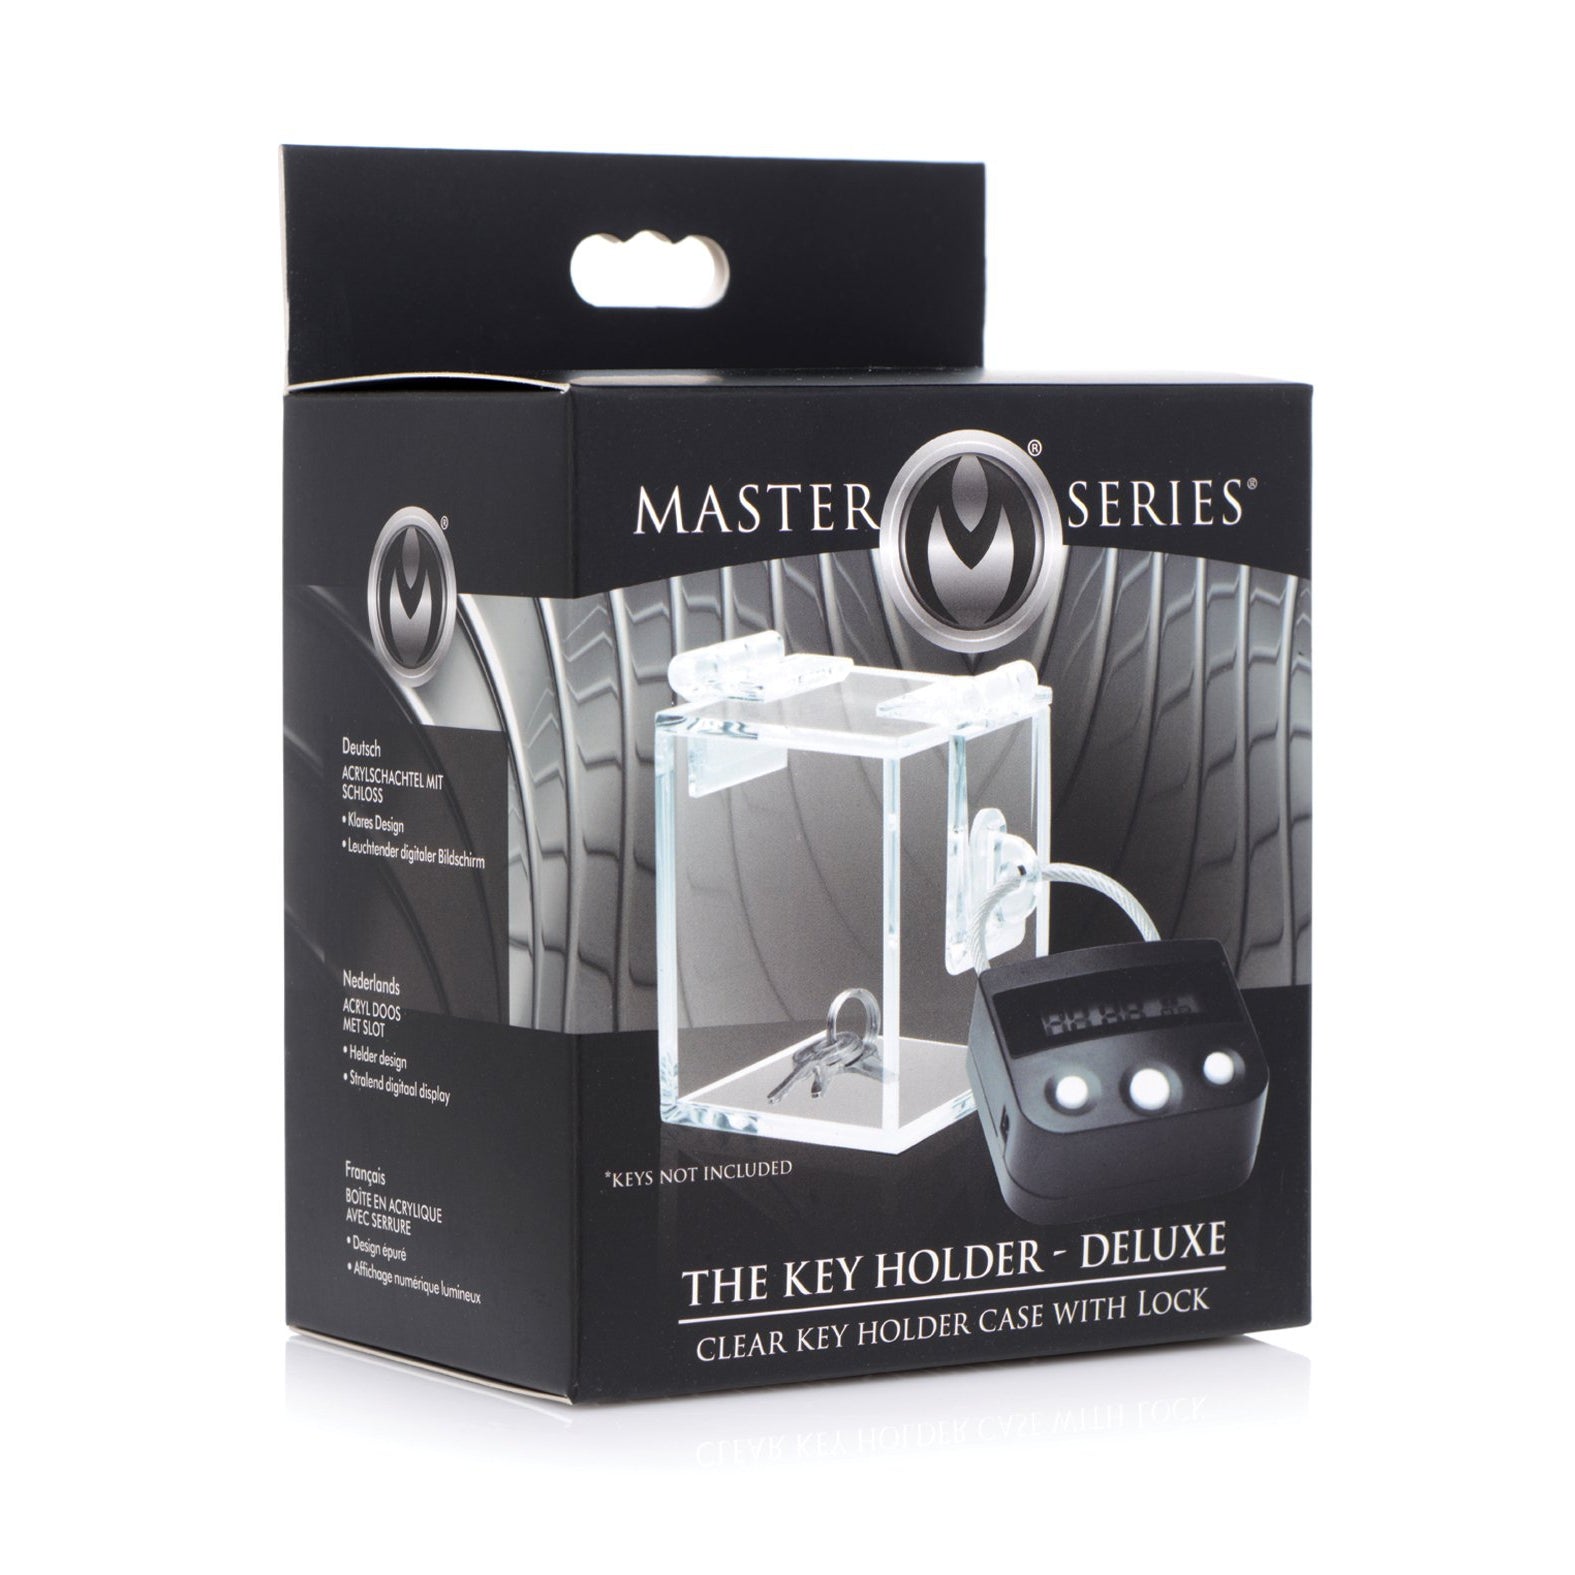 Master Series The Key Holder Deluxe Clear Case with Lock